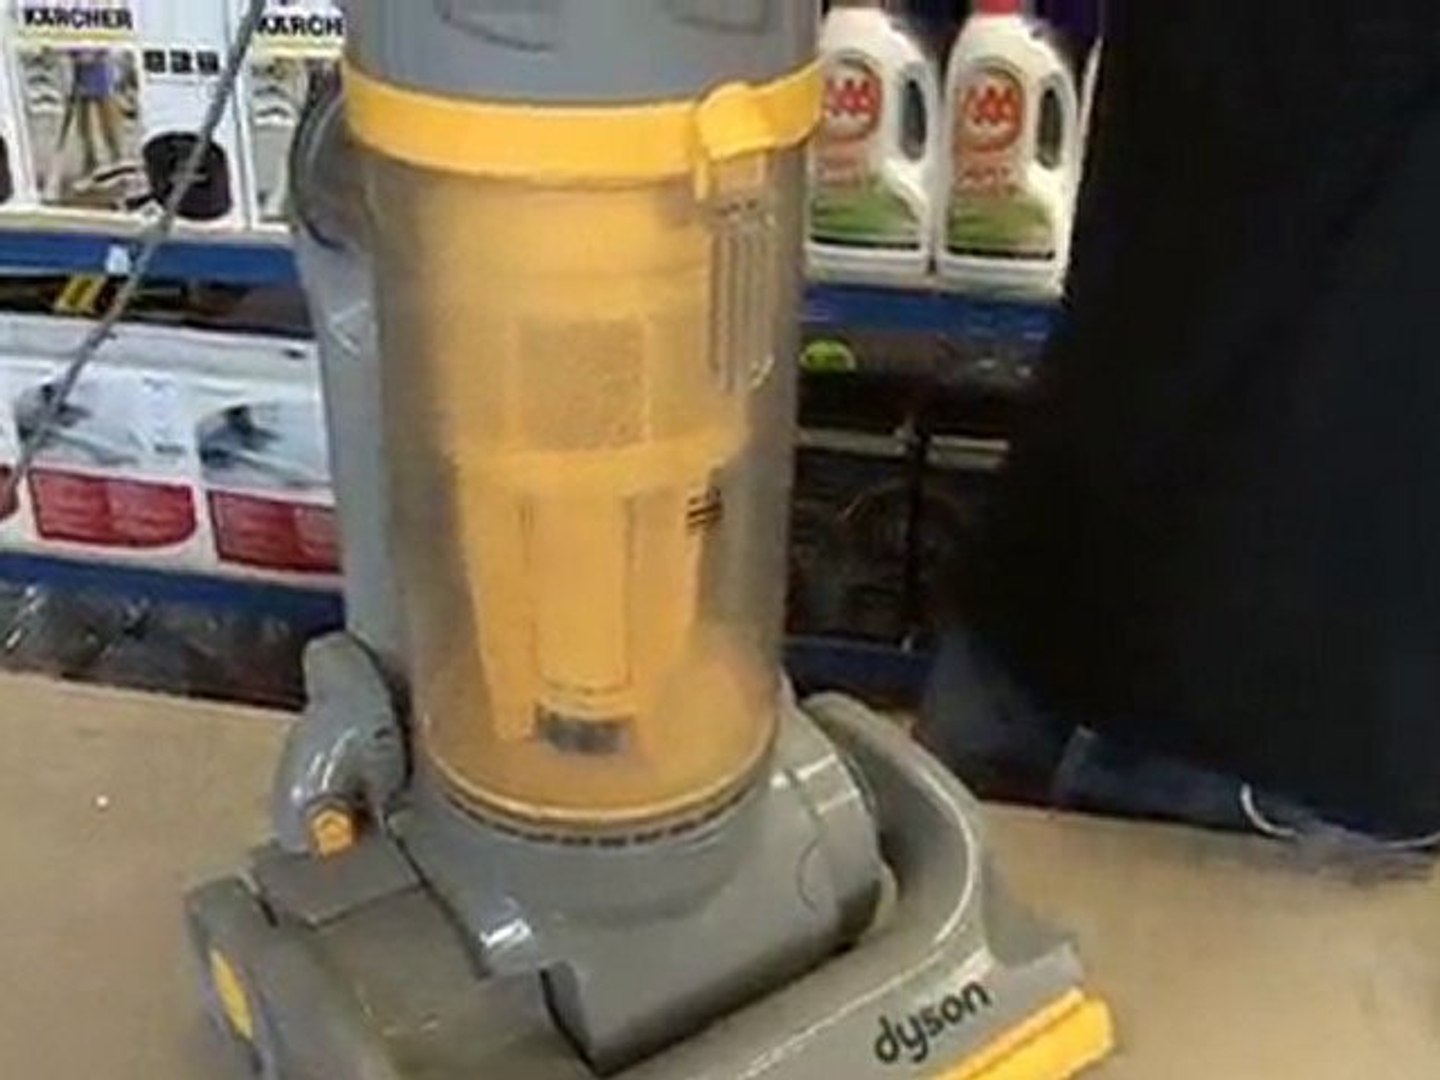 How to replace the filters on a Dyson - DC07 - video Dailymotion